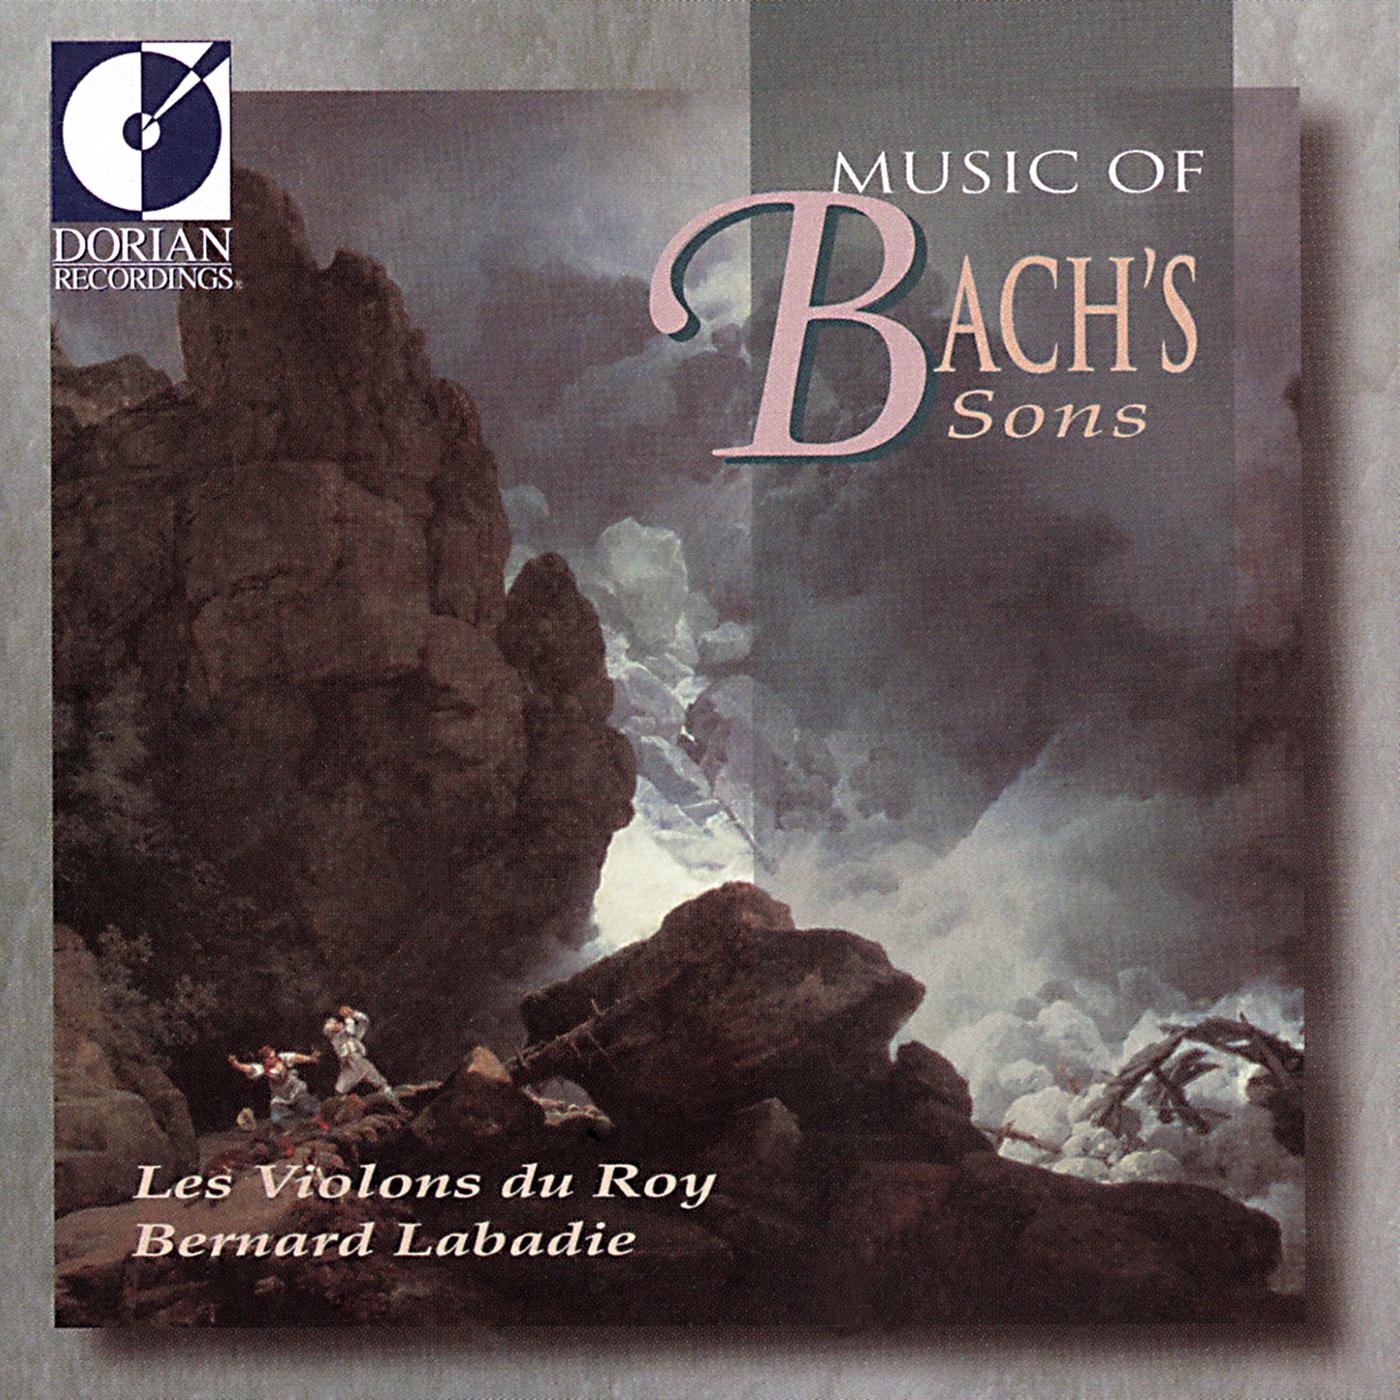 BACH, C.P.E.: Sinfonia, Wq. 179 / BACH, J.S.: Suite (Overture) No. 5 / BACH, J.C.F.: Sinfonia, W. 1/3 (Music of Bach's Sons) (Labadie)